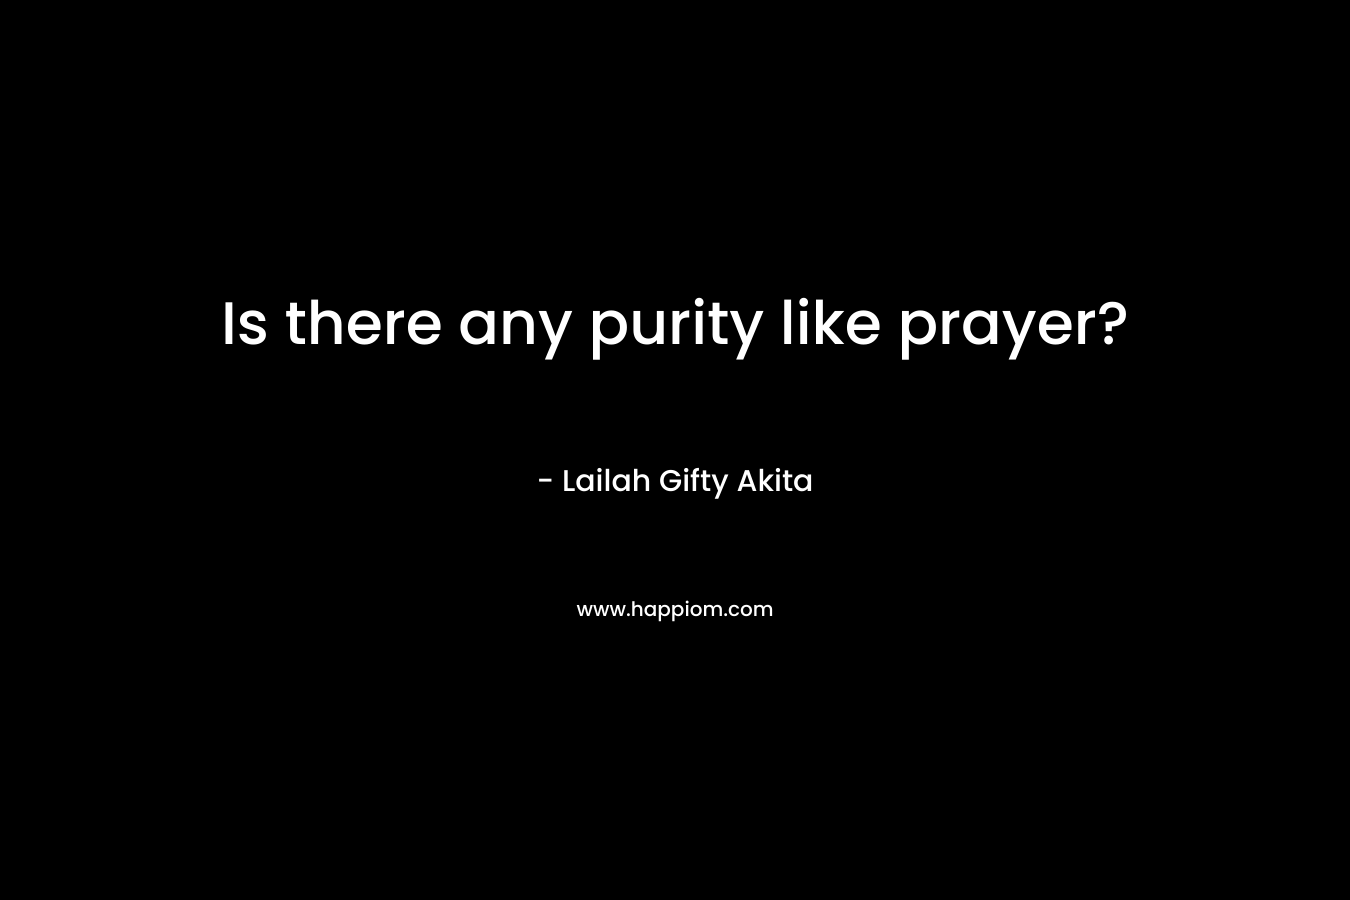 Is there any purity like prayer?